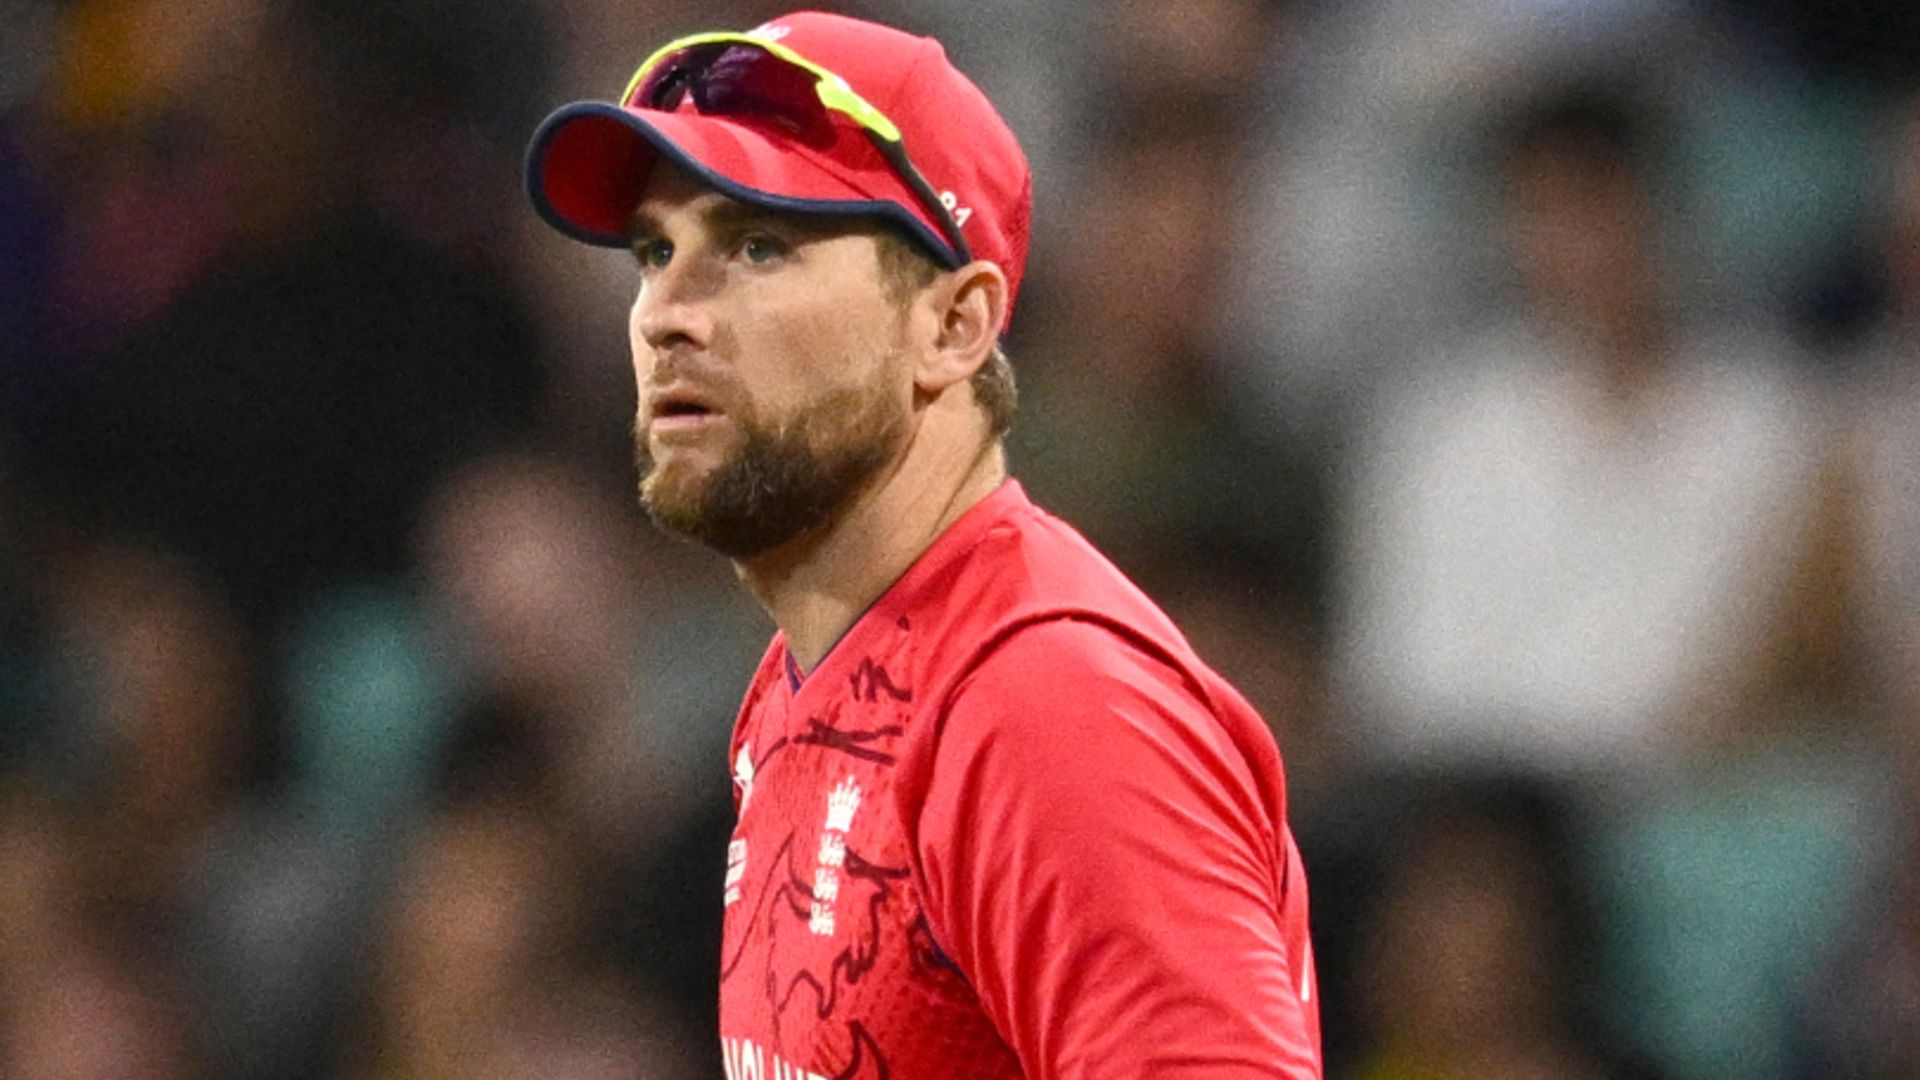 Salt to open if Malan misses out on semi-finals?